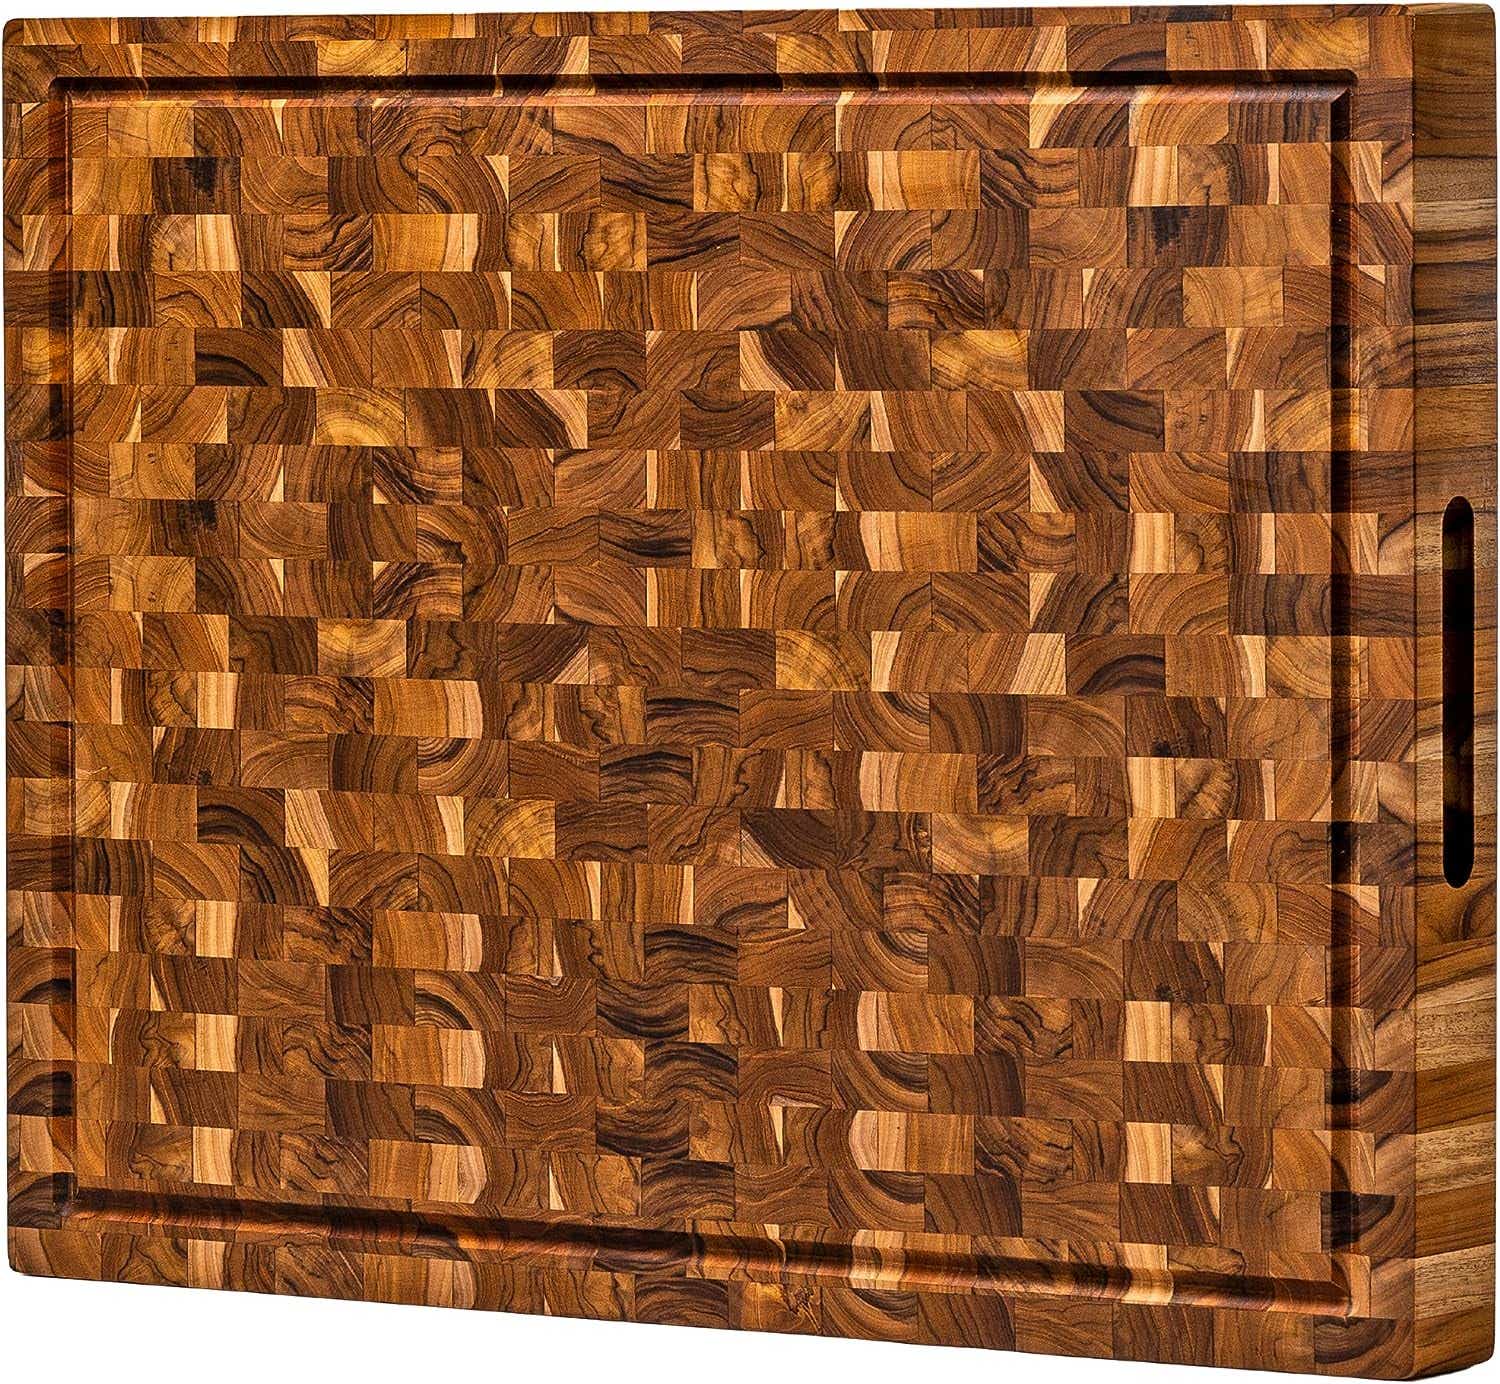 Extra Large End Grain Butcher Block Cutting Board [2" Thick] Made of Teak Wood and Conditioned with Beeswax, Linseed & Lemon Oil. 24" x 18" by Ziruma